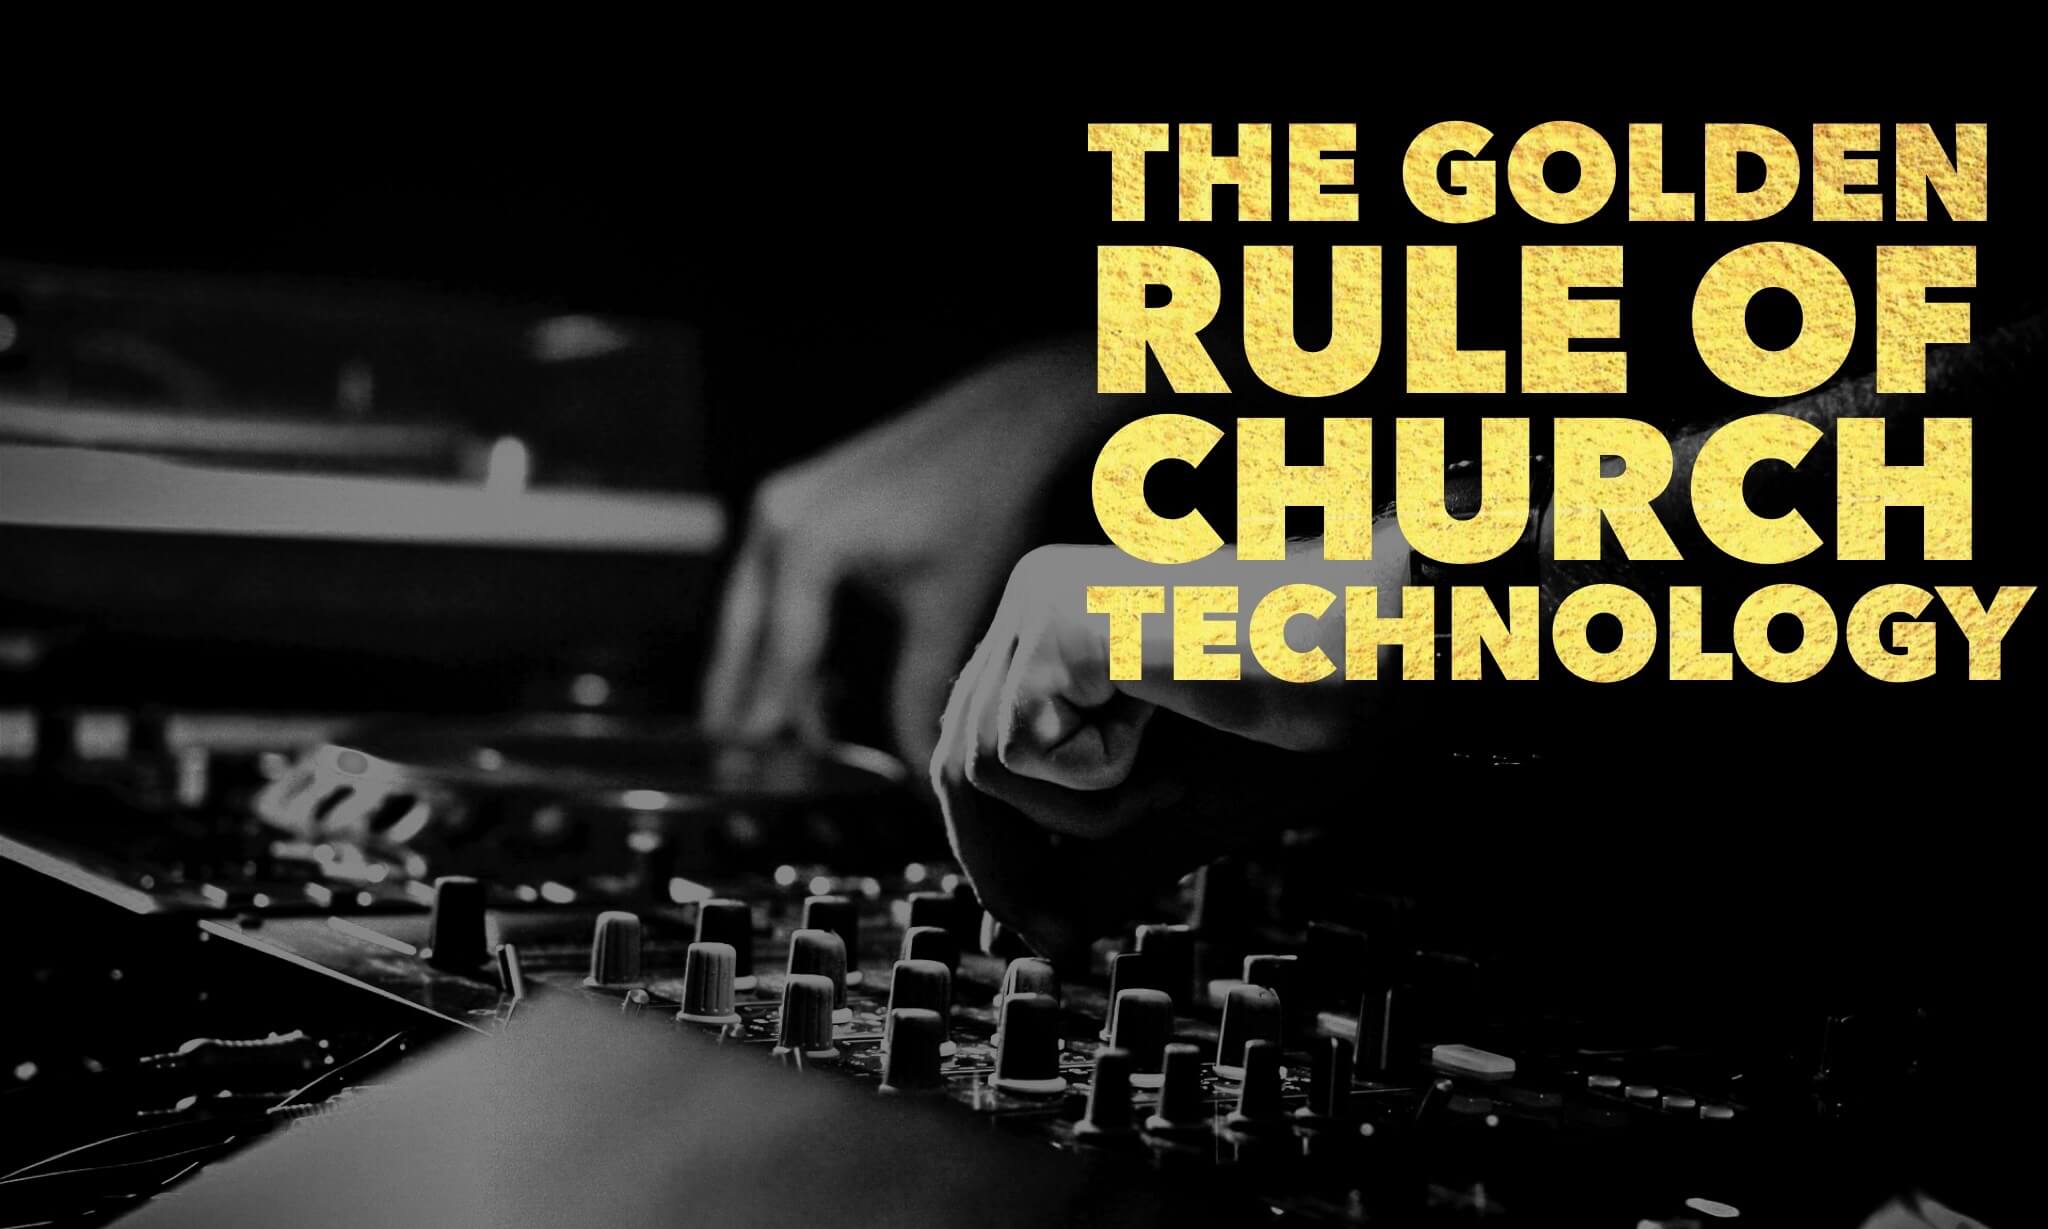 The Golden Rule of Church Technology